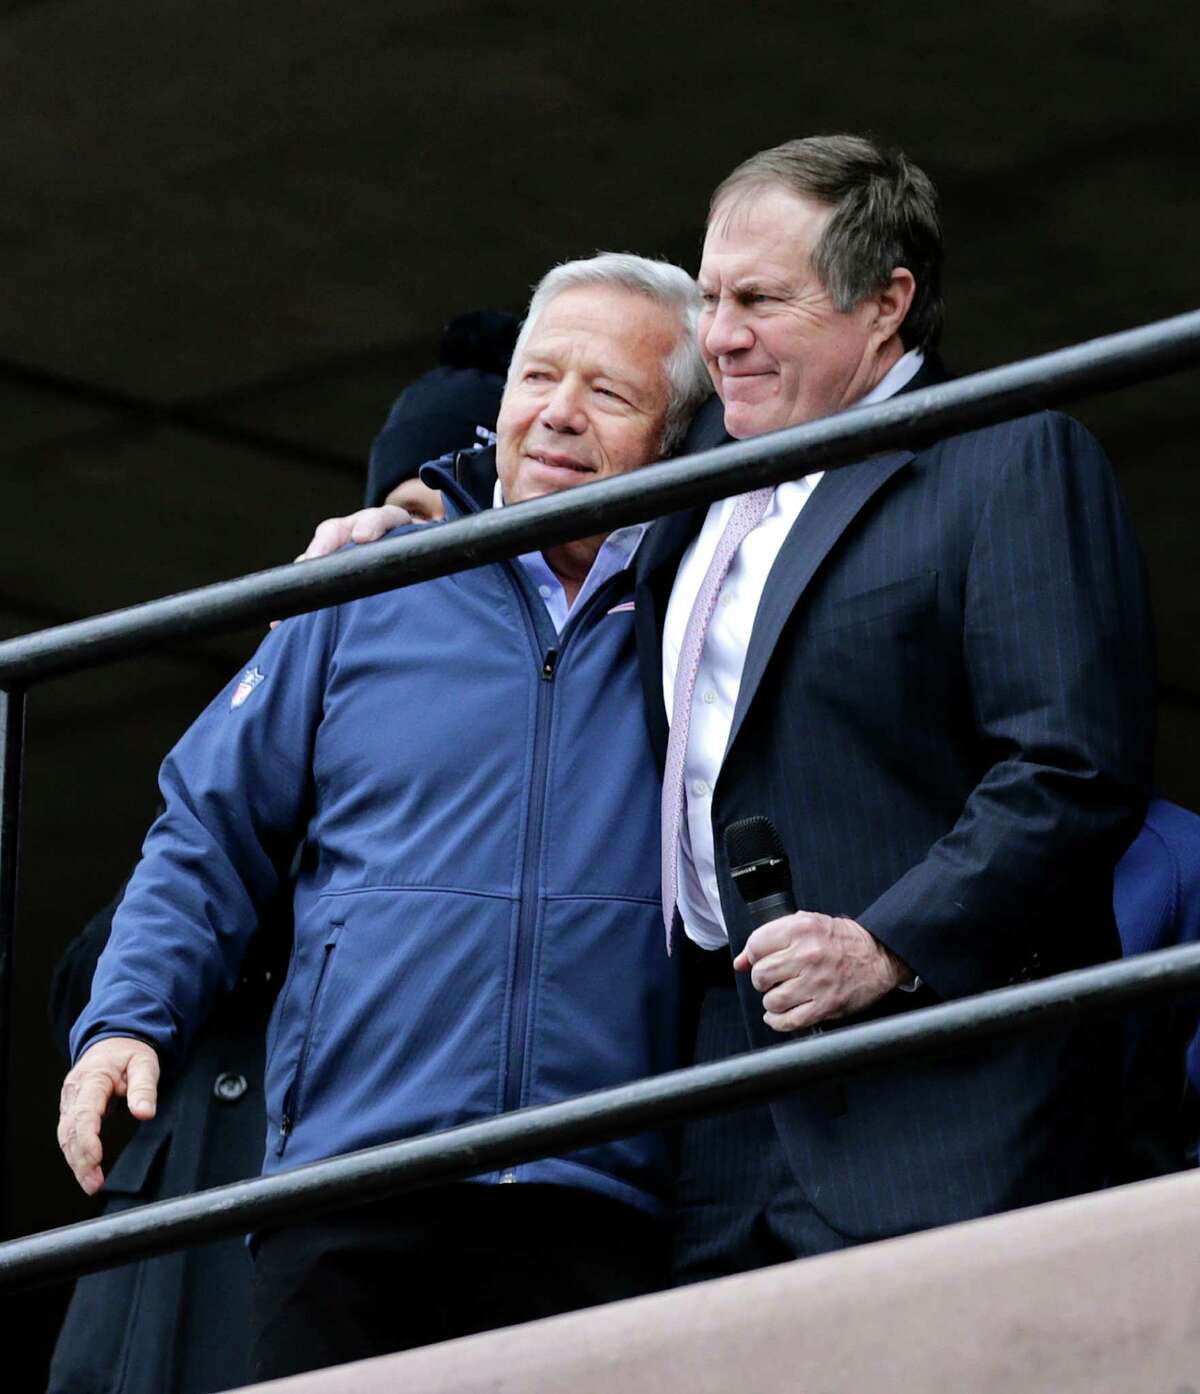 New England Patriots head coach Bill Belichick, right, embraces team owner Robert Kraft during an NFL football send-off rally at City Hall in Boston Monday, Jan. 26, 2015. The Patriots play the Seattle Seahawks in Sunday's Super Bowl XLIX in Glendale, Ariz. (AP Photo/Charles Krupa) ORG XMIT: MACK103